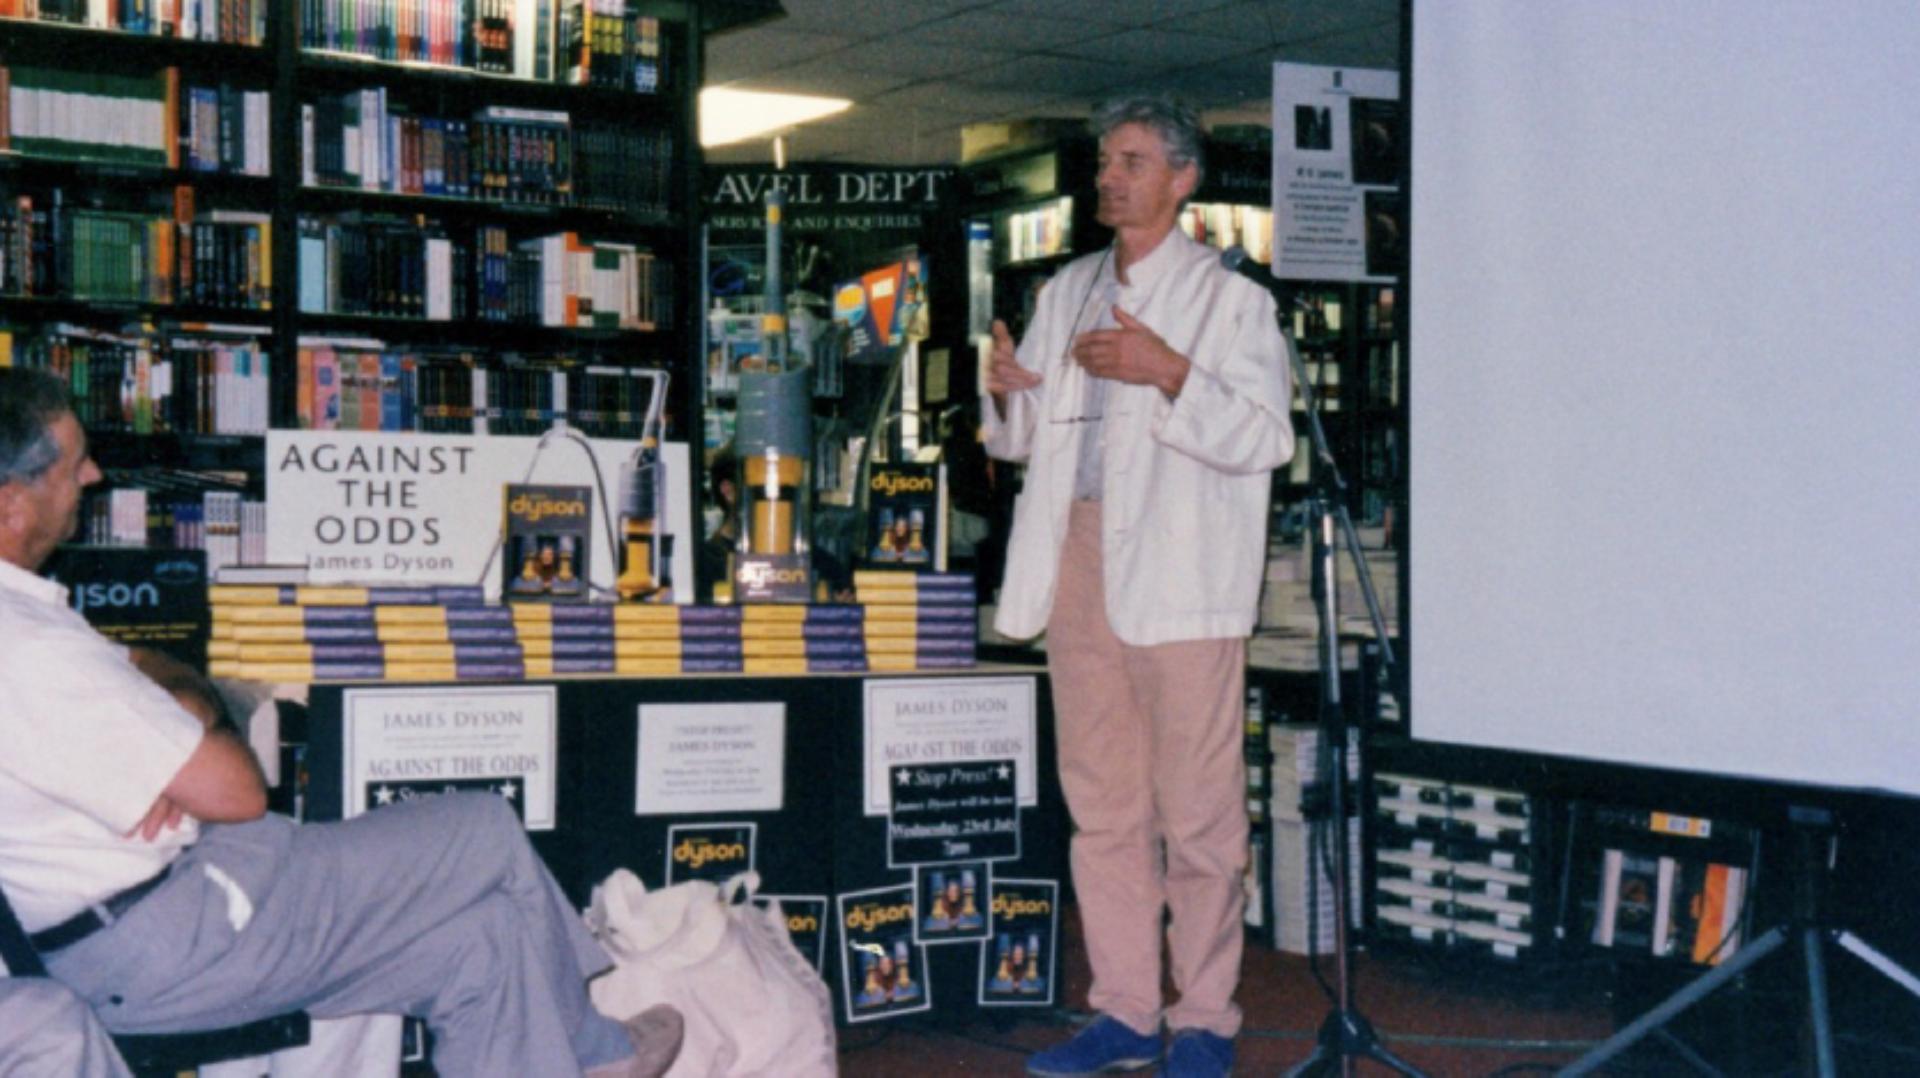 James Dyson standing in a book store